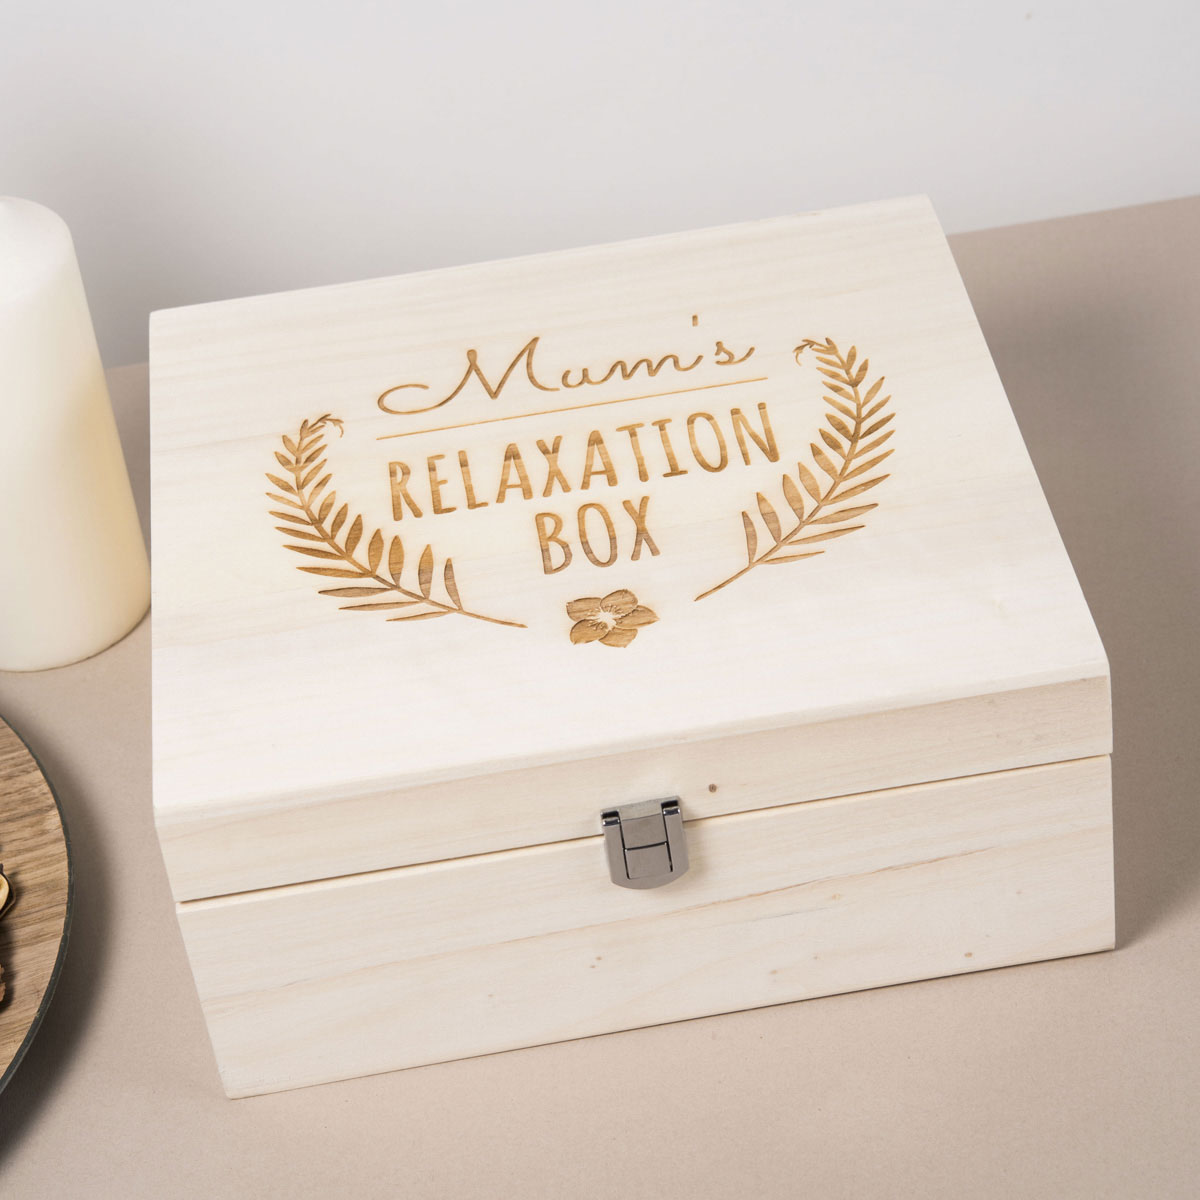 Engraved Wooden Storage Box - Relaxation Box